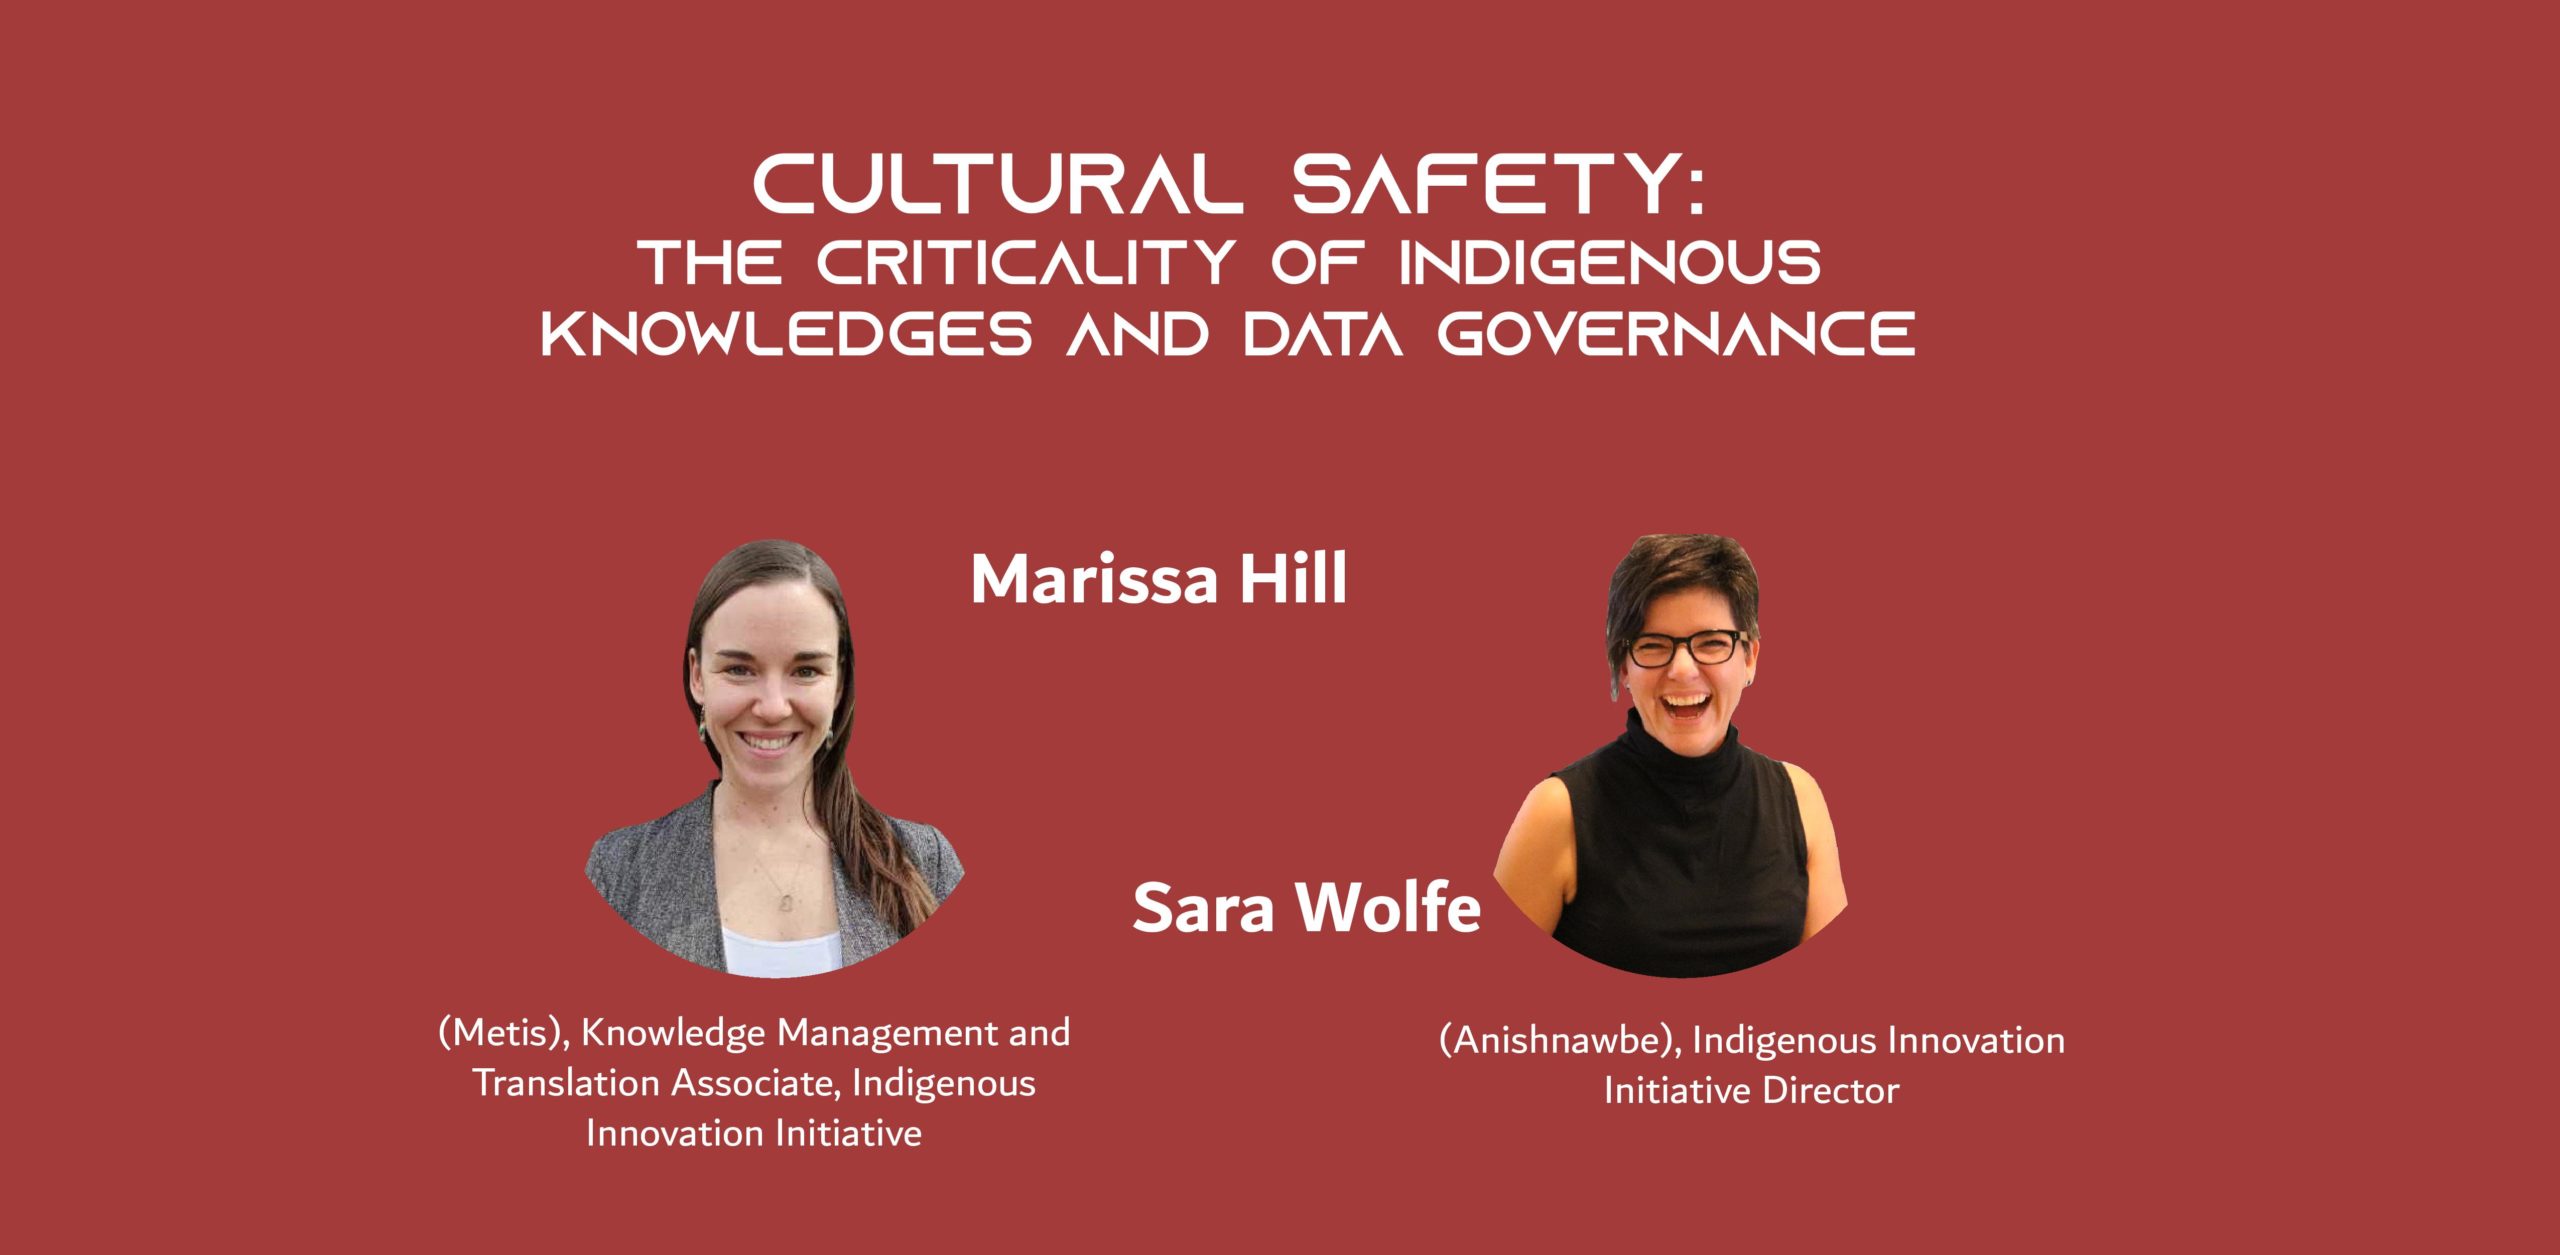 Picture of two women on a red background with the text: Cultural safety: the criticality of Indigenous Knowledges and data governance By Sara Wolfe (Anishnawbe), Indigenous Innovation Initiative Director, and Marissa Hill (Metis), Knowledge Management and Translation Associate, Indigenous Innovation Initiative